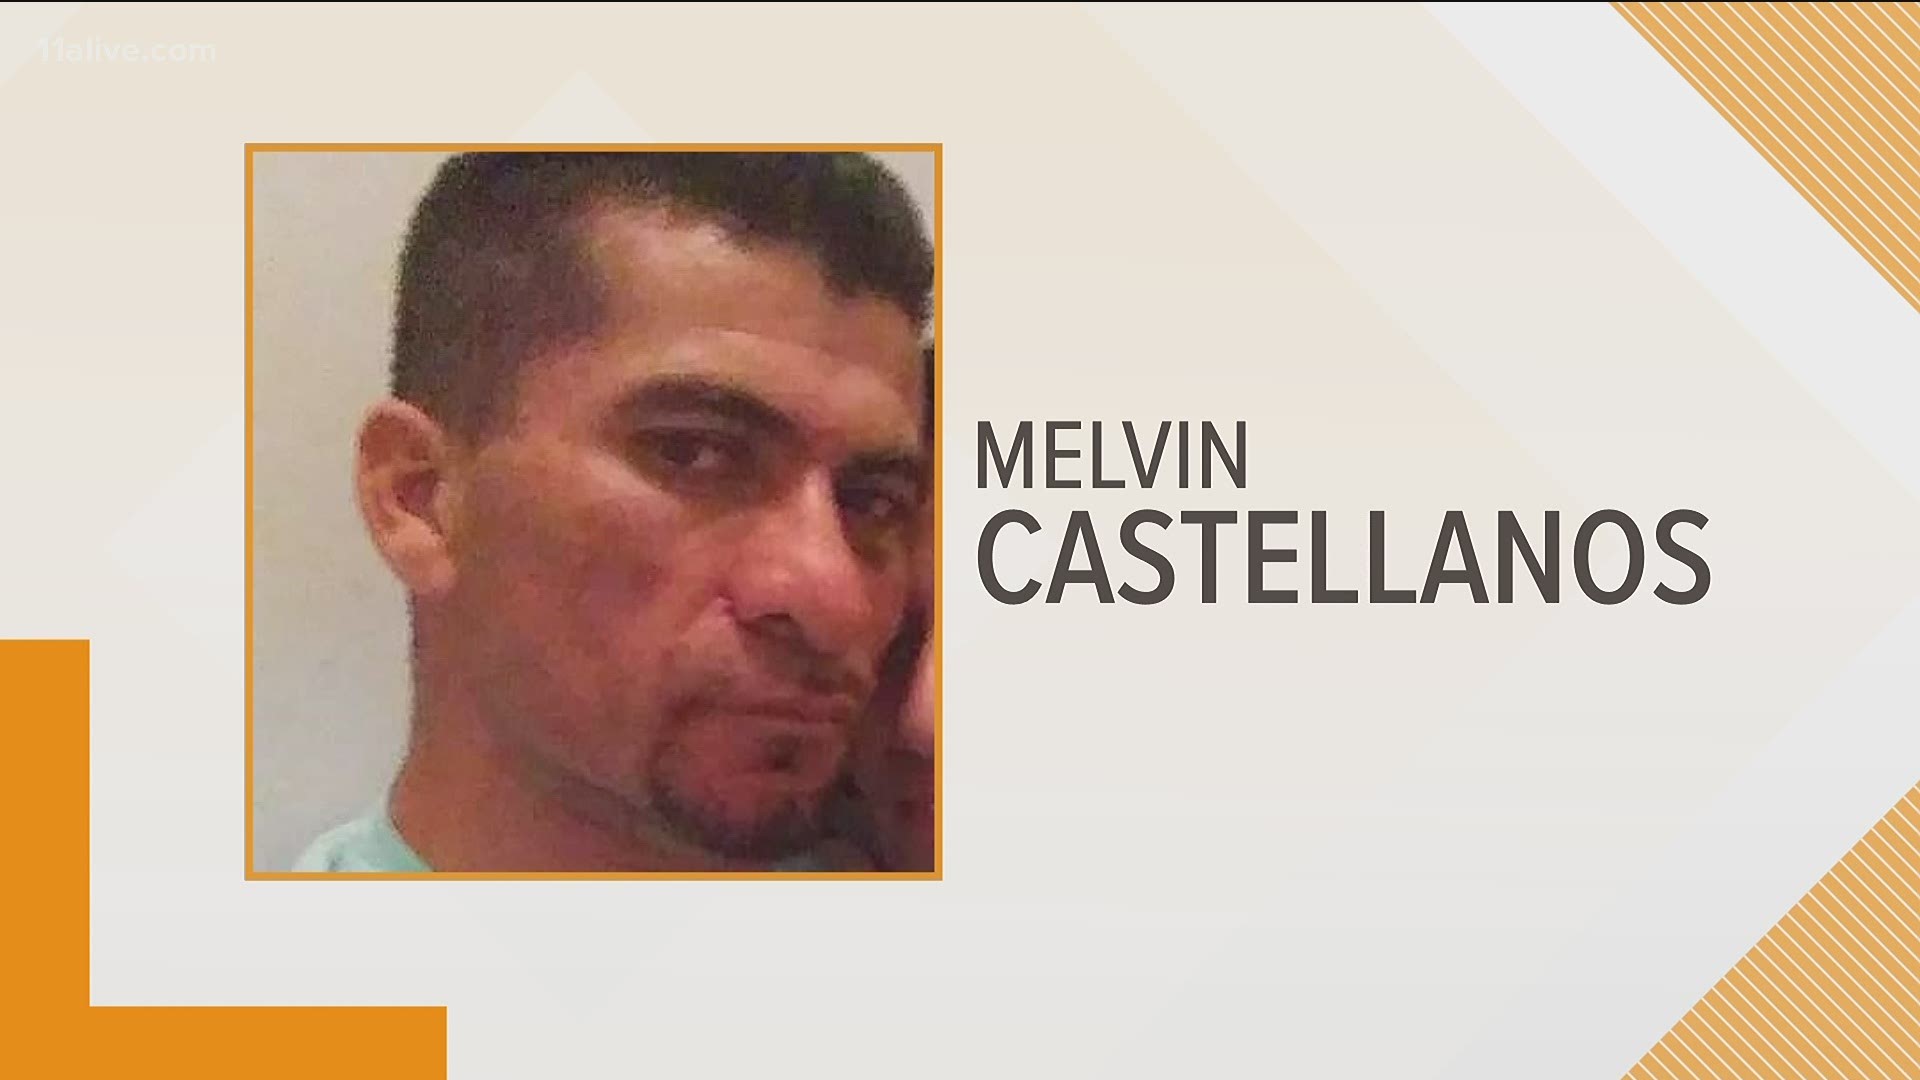 Police arrested Melvin Castellanos after investigators successfully located his 16-year-old daughter, following reports that she was taken without permission.